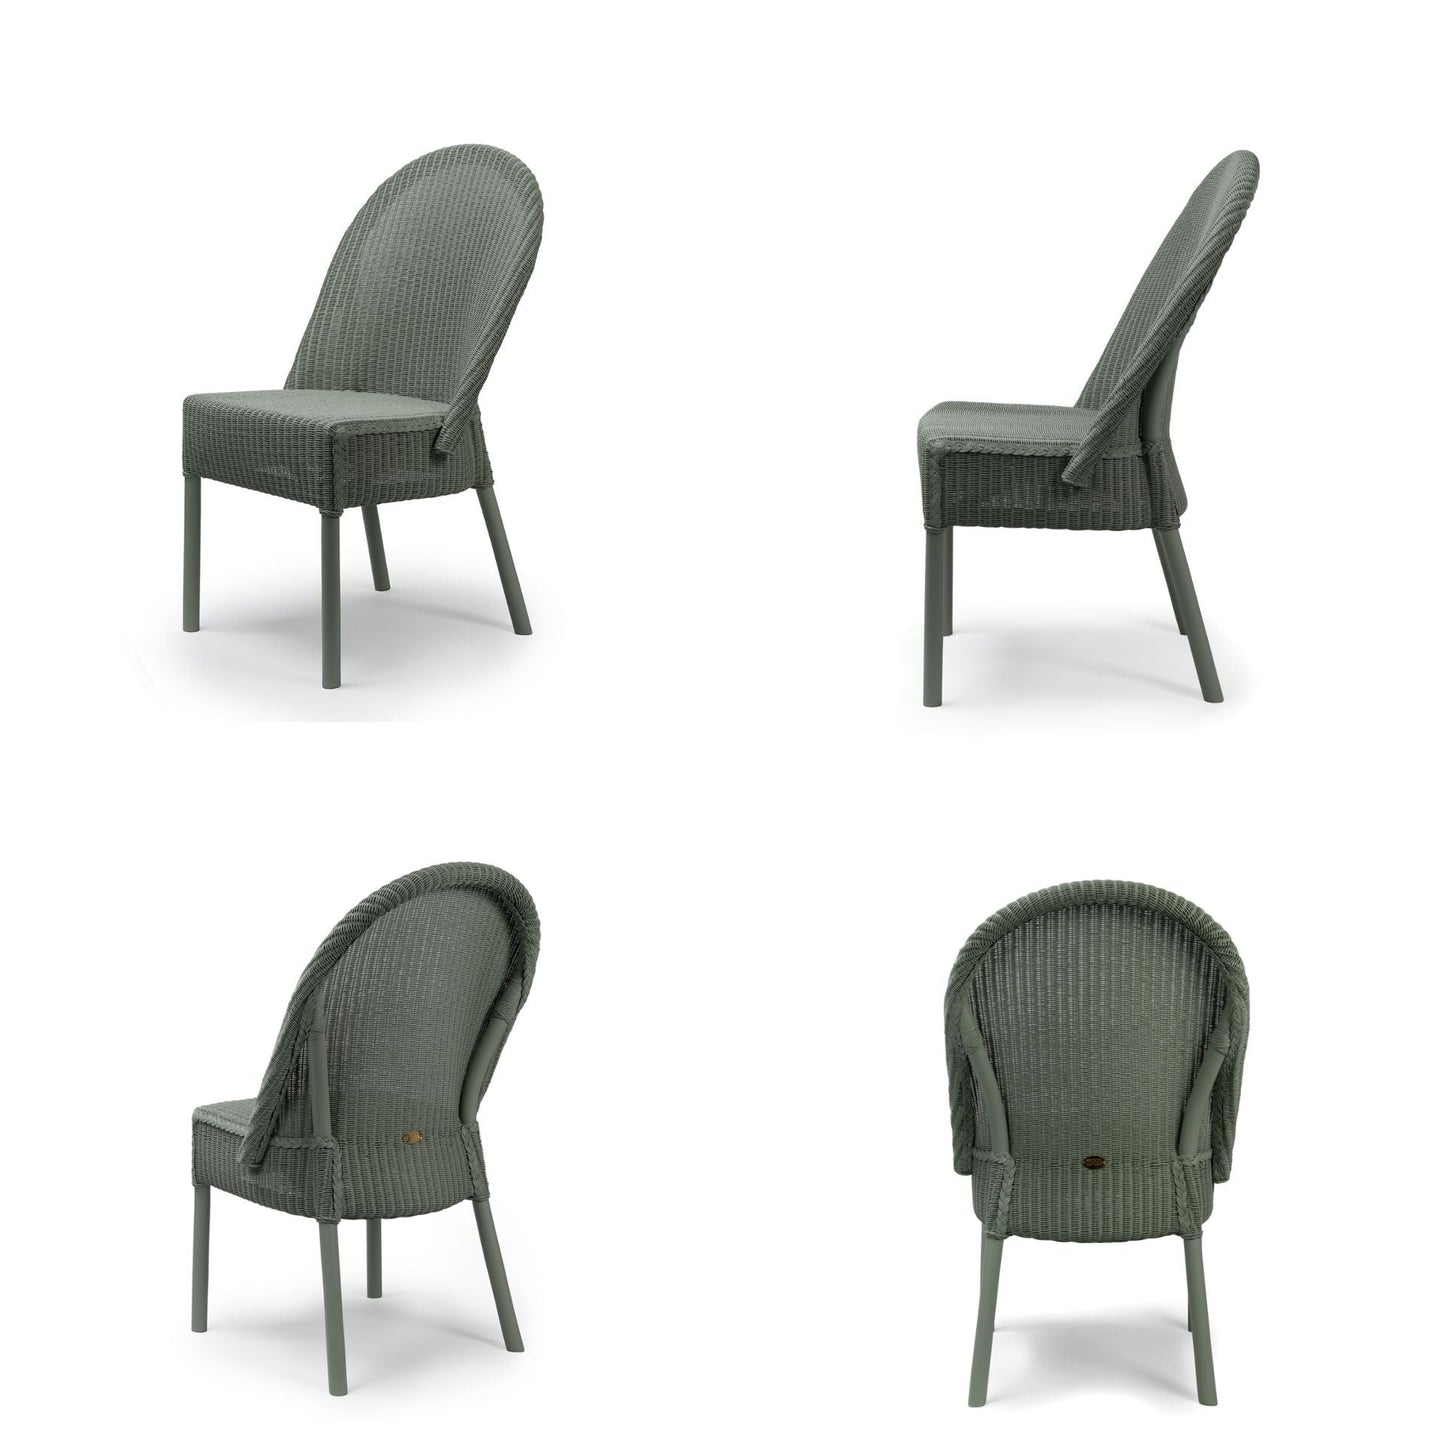 Special offer discount Lloyd loom Newmarket Dining Chair- set of 4